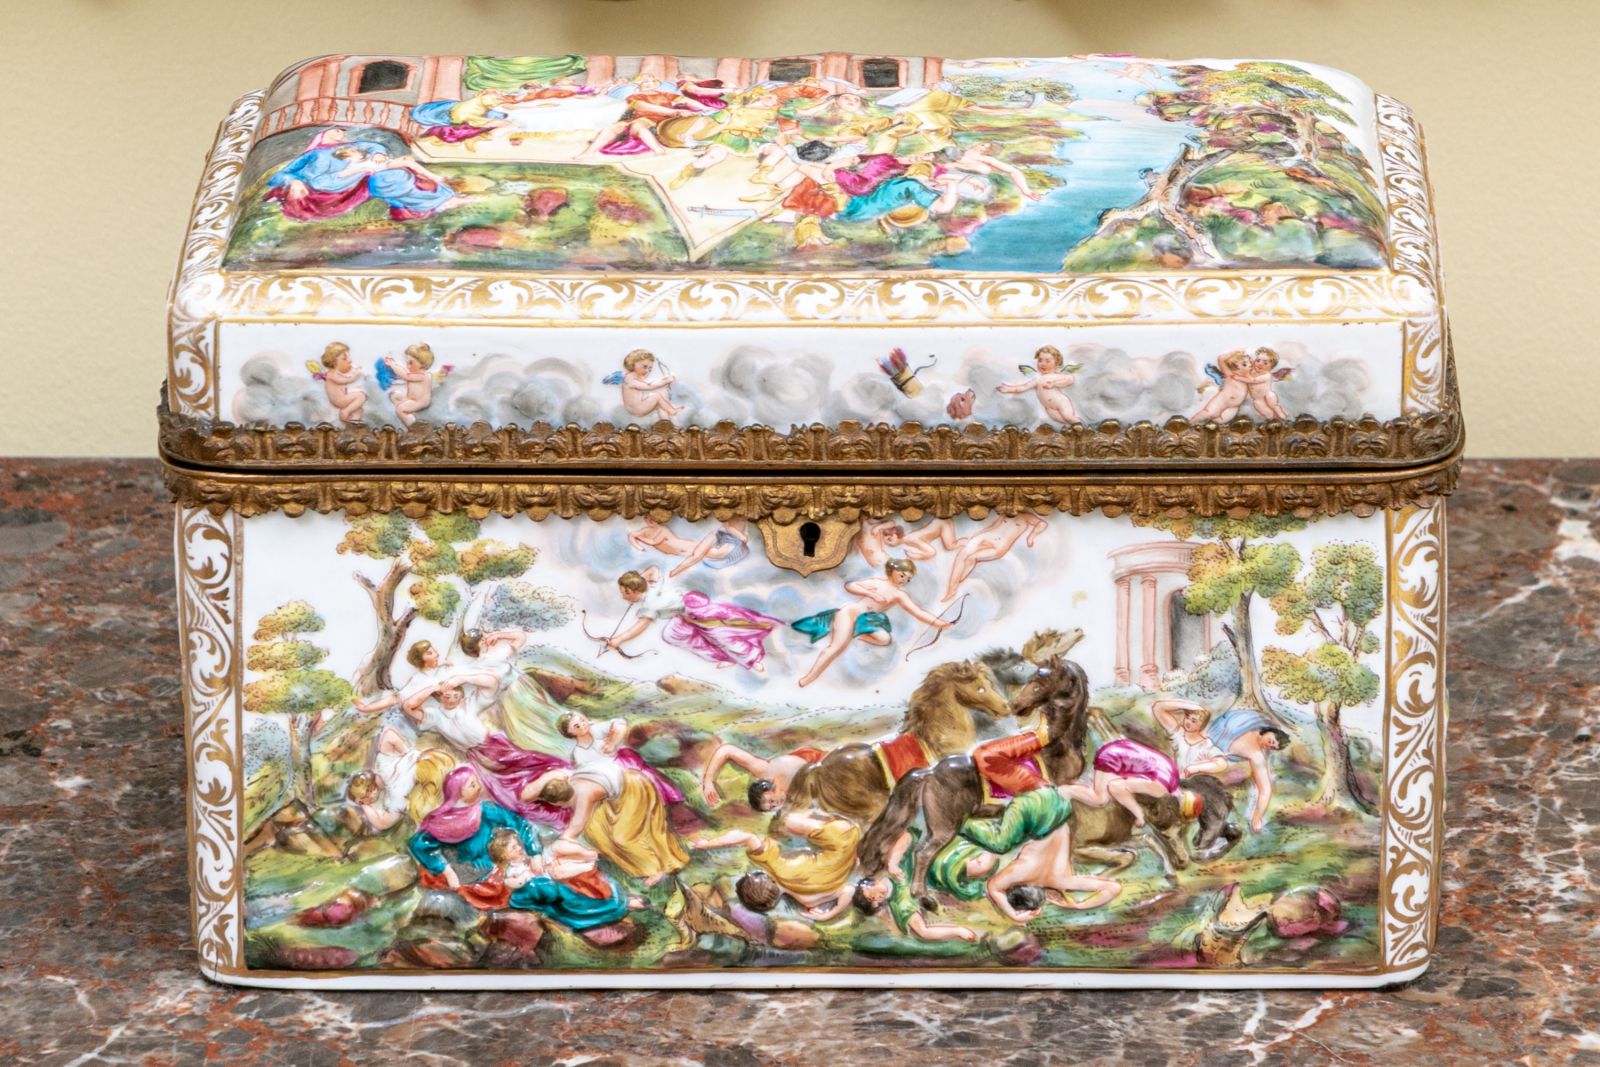 EXQUISITE ITALIAN CROWN NAPLES CAPODIMONTE PORCELAIN HINGED BOX & COVER, EARLY 20TH C.